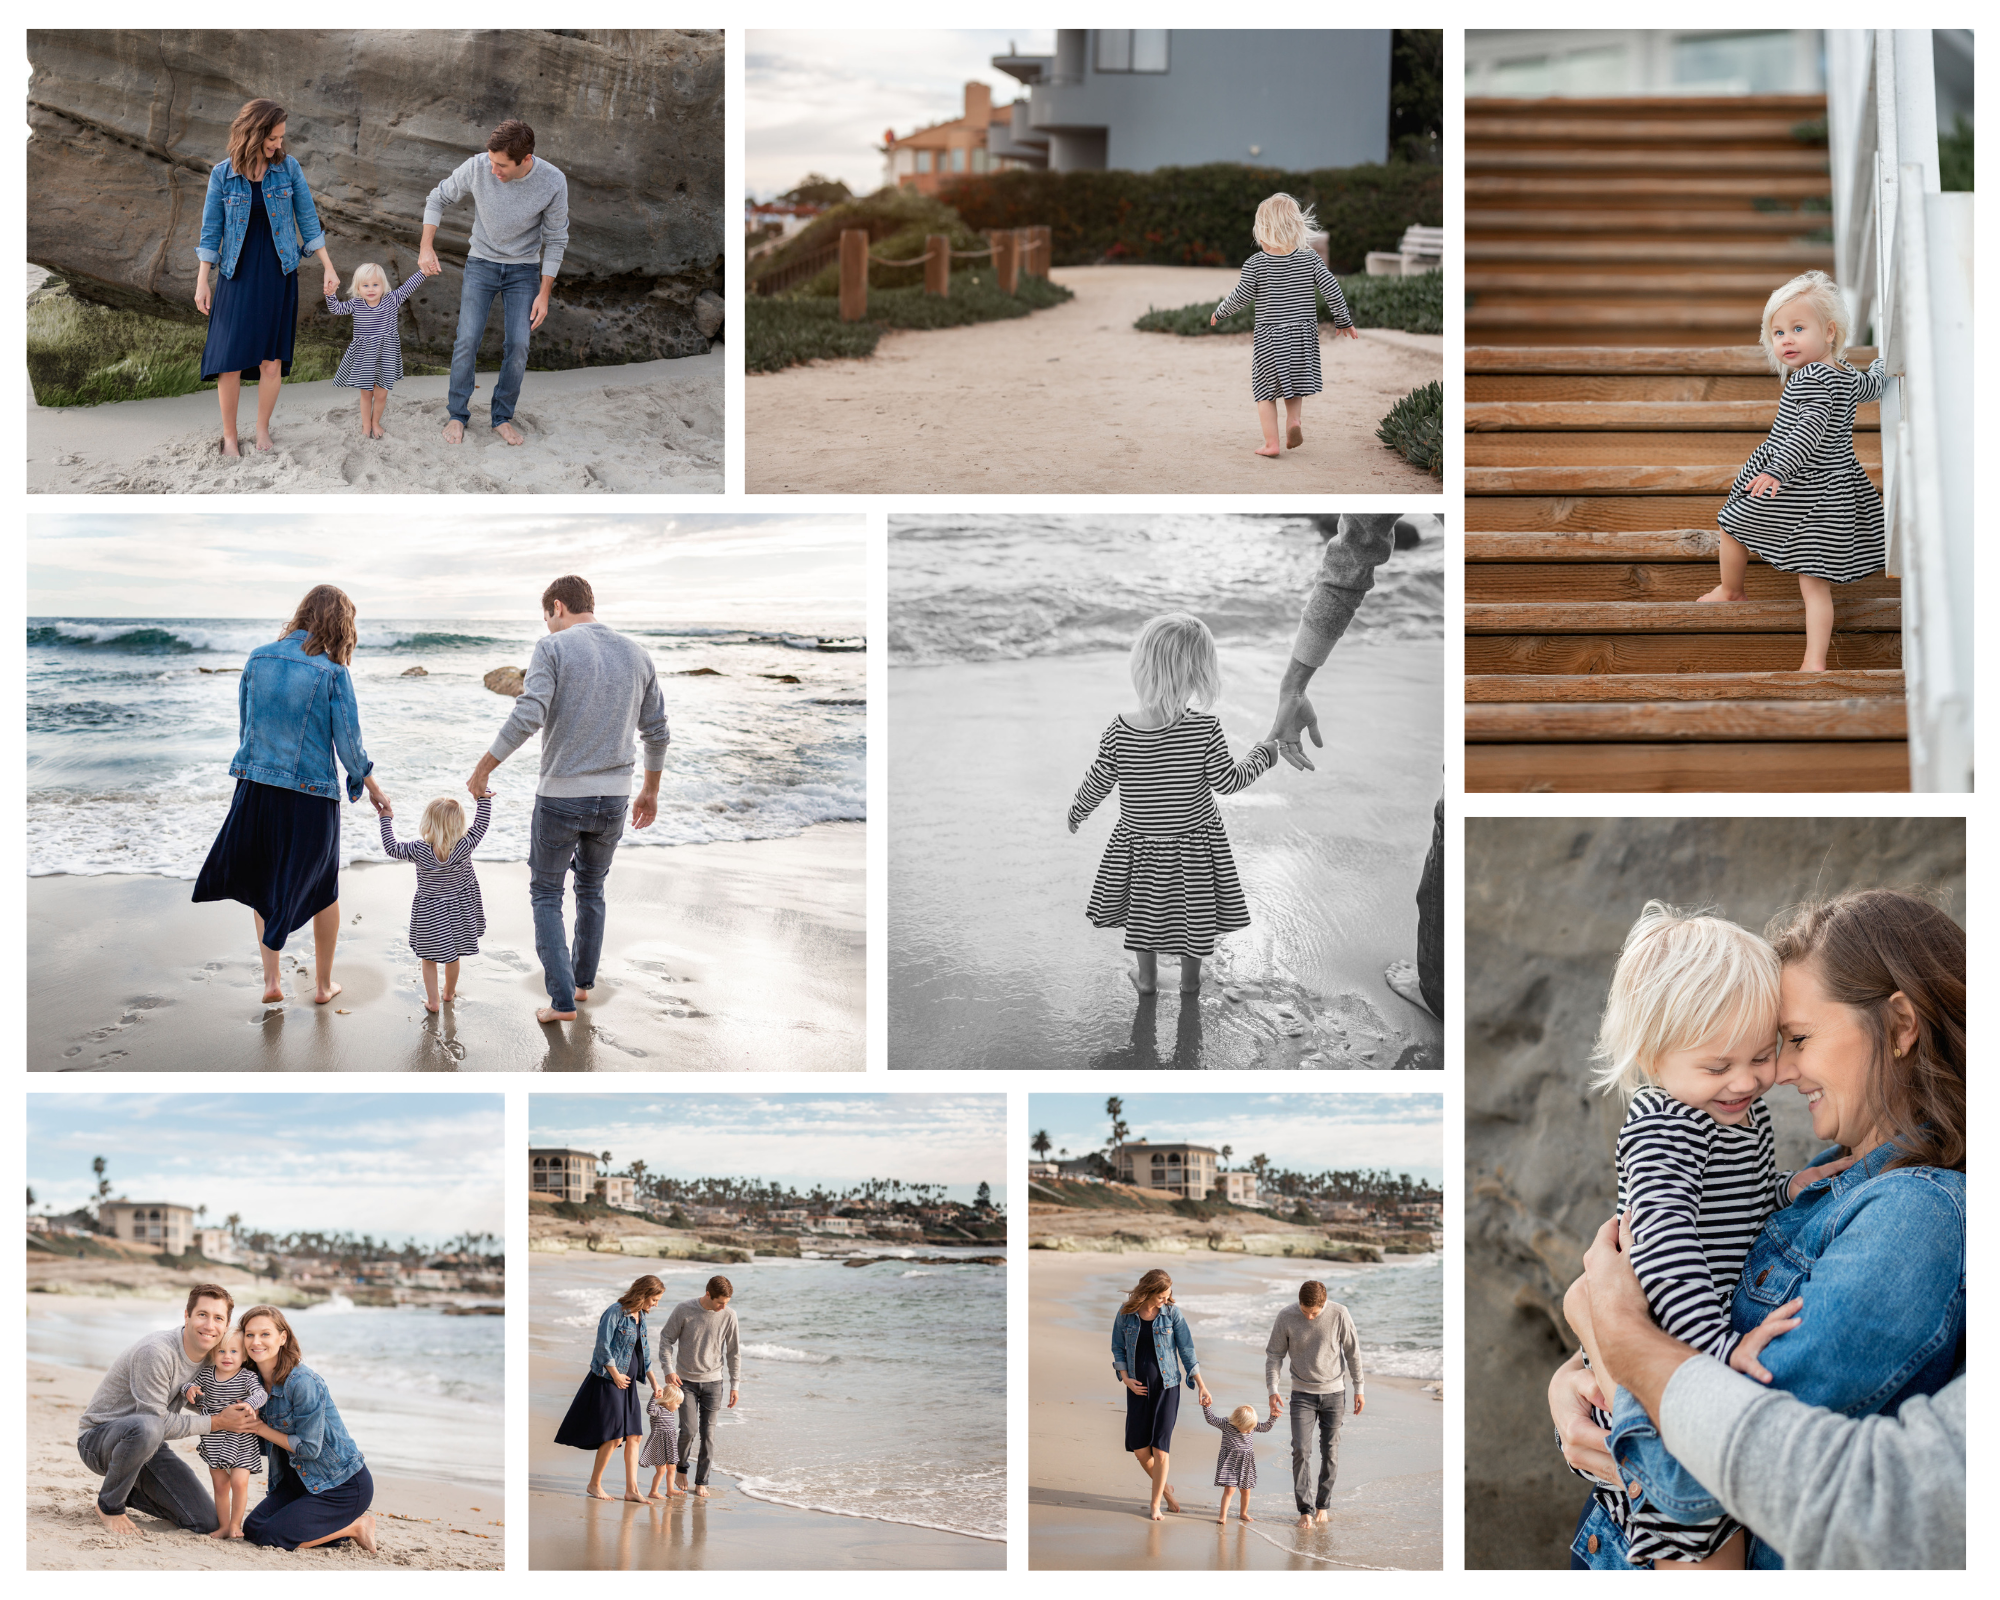 Windansea Beach Pregnancy Announcement and Family Pictures Collage captured by La Jolla Family Photographer